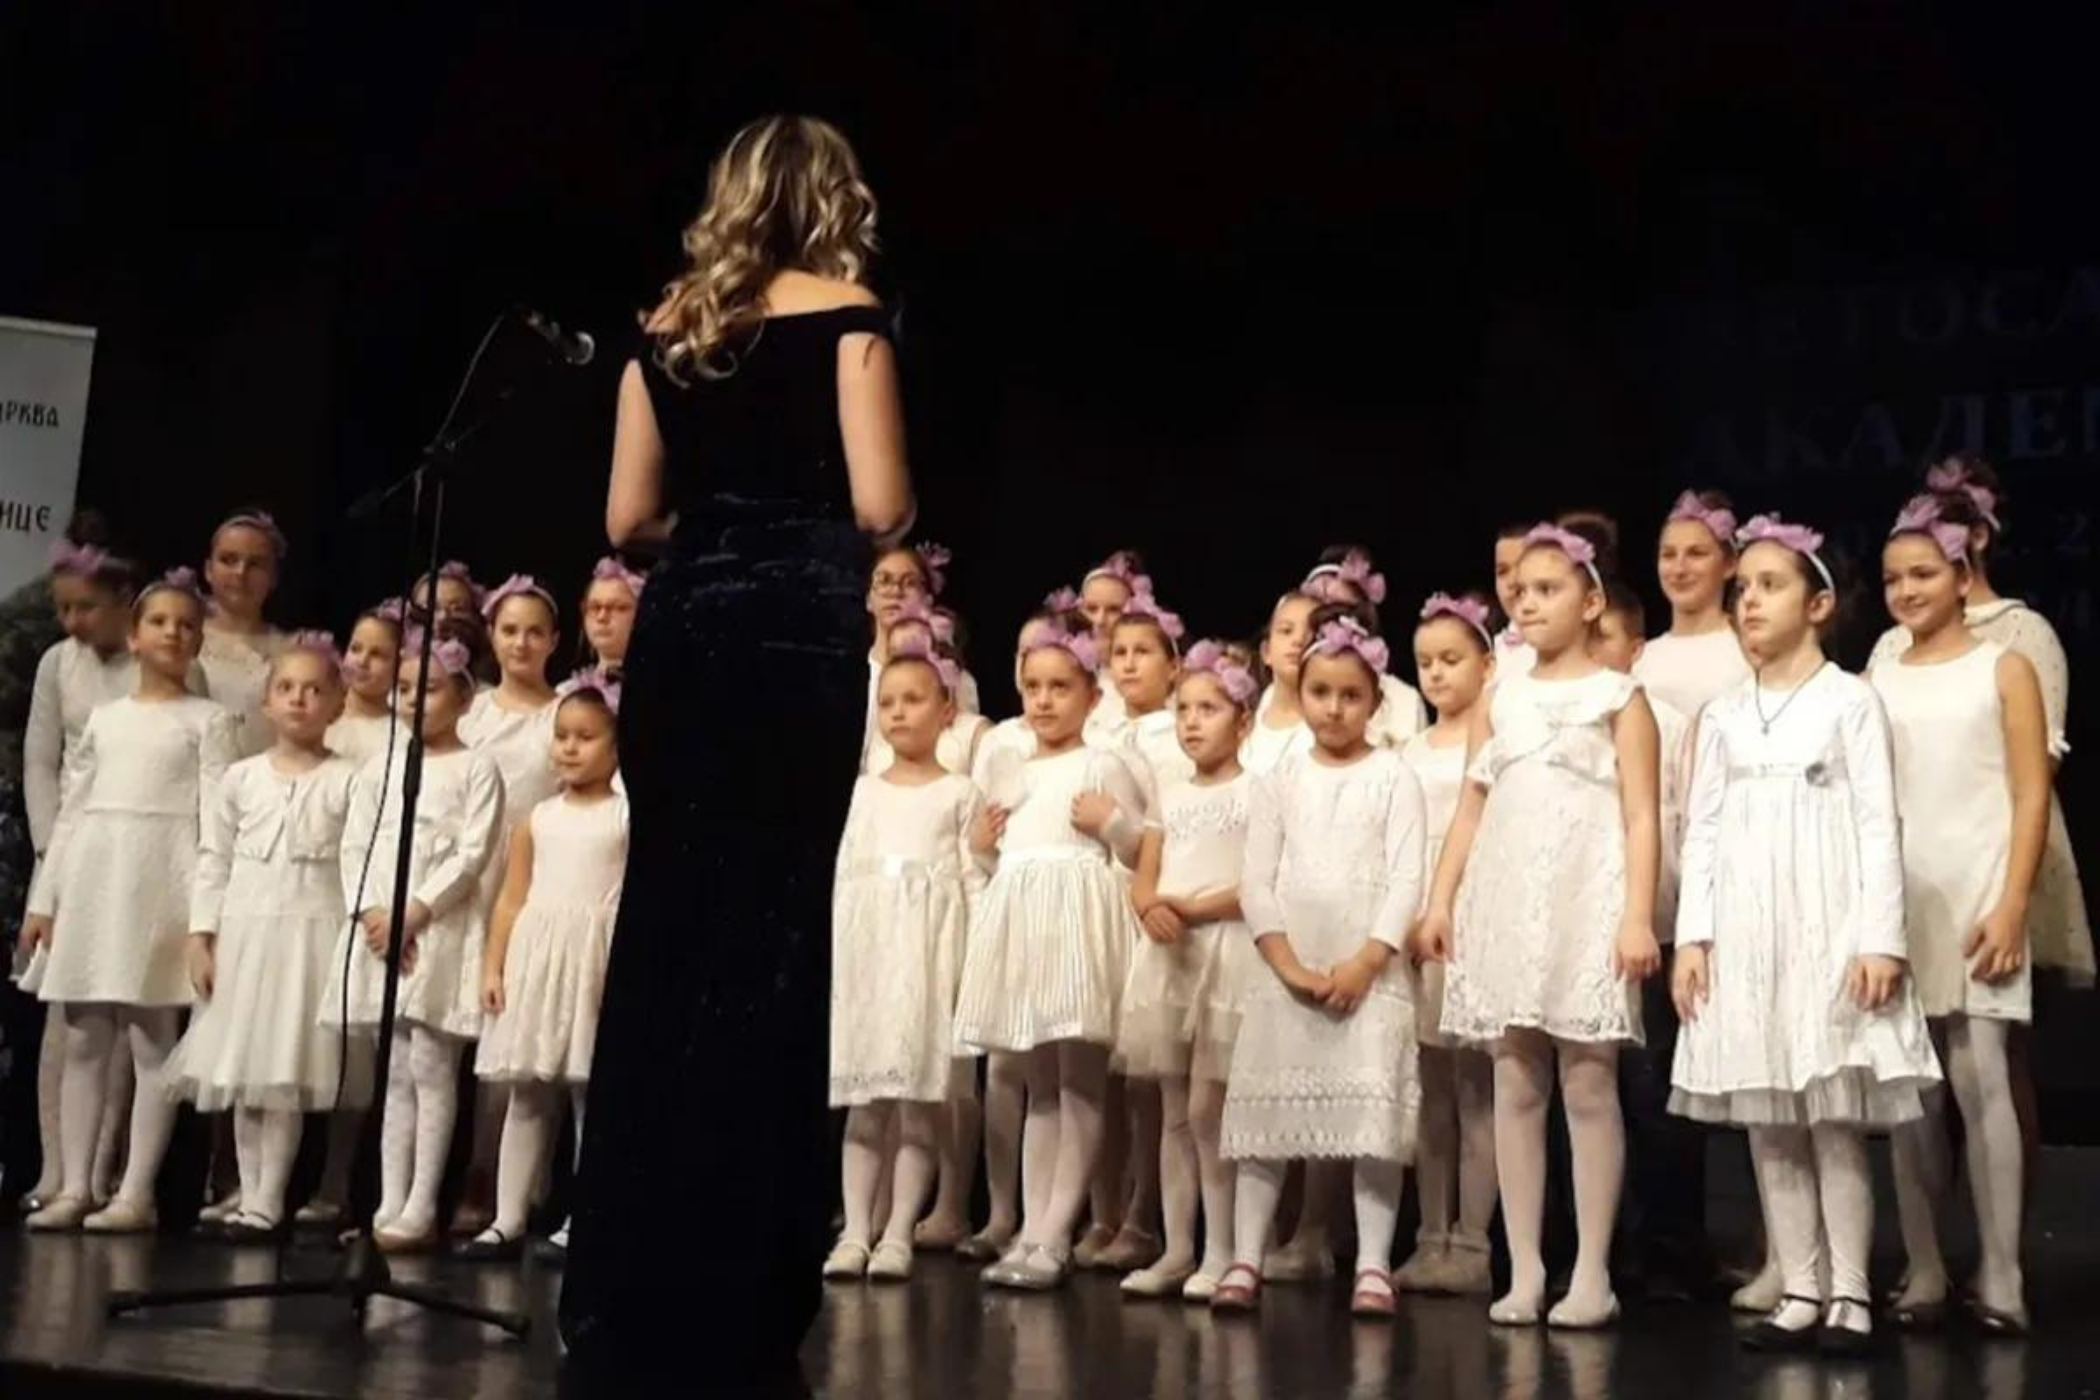 Many little girls in white dresses and pink bow on their heads are standing in a row on a stage, in front of them with their backs to us a woman in a long black evening dress.